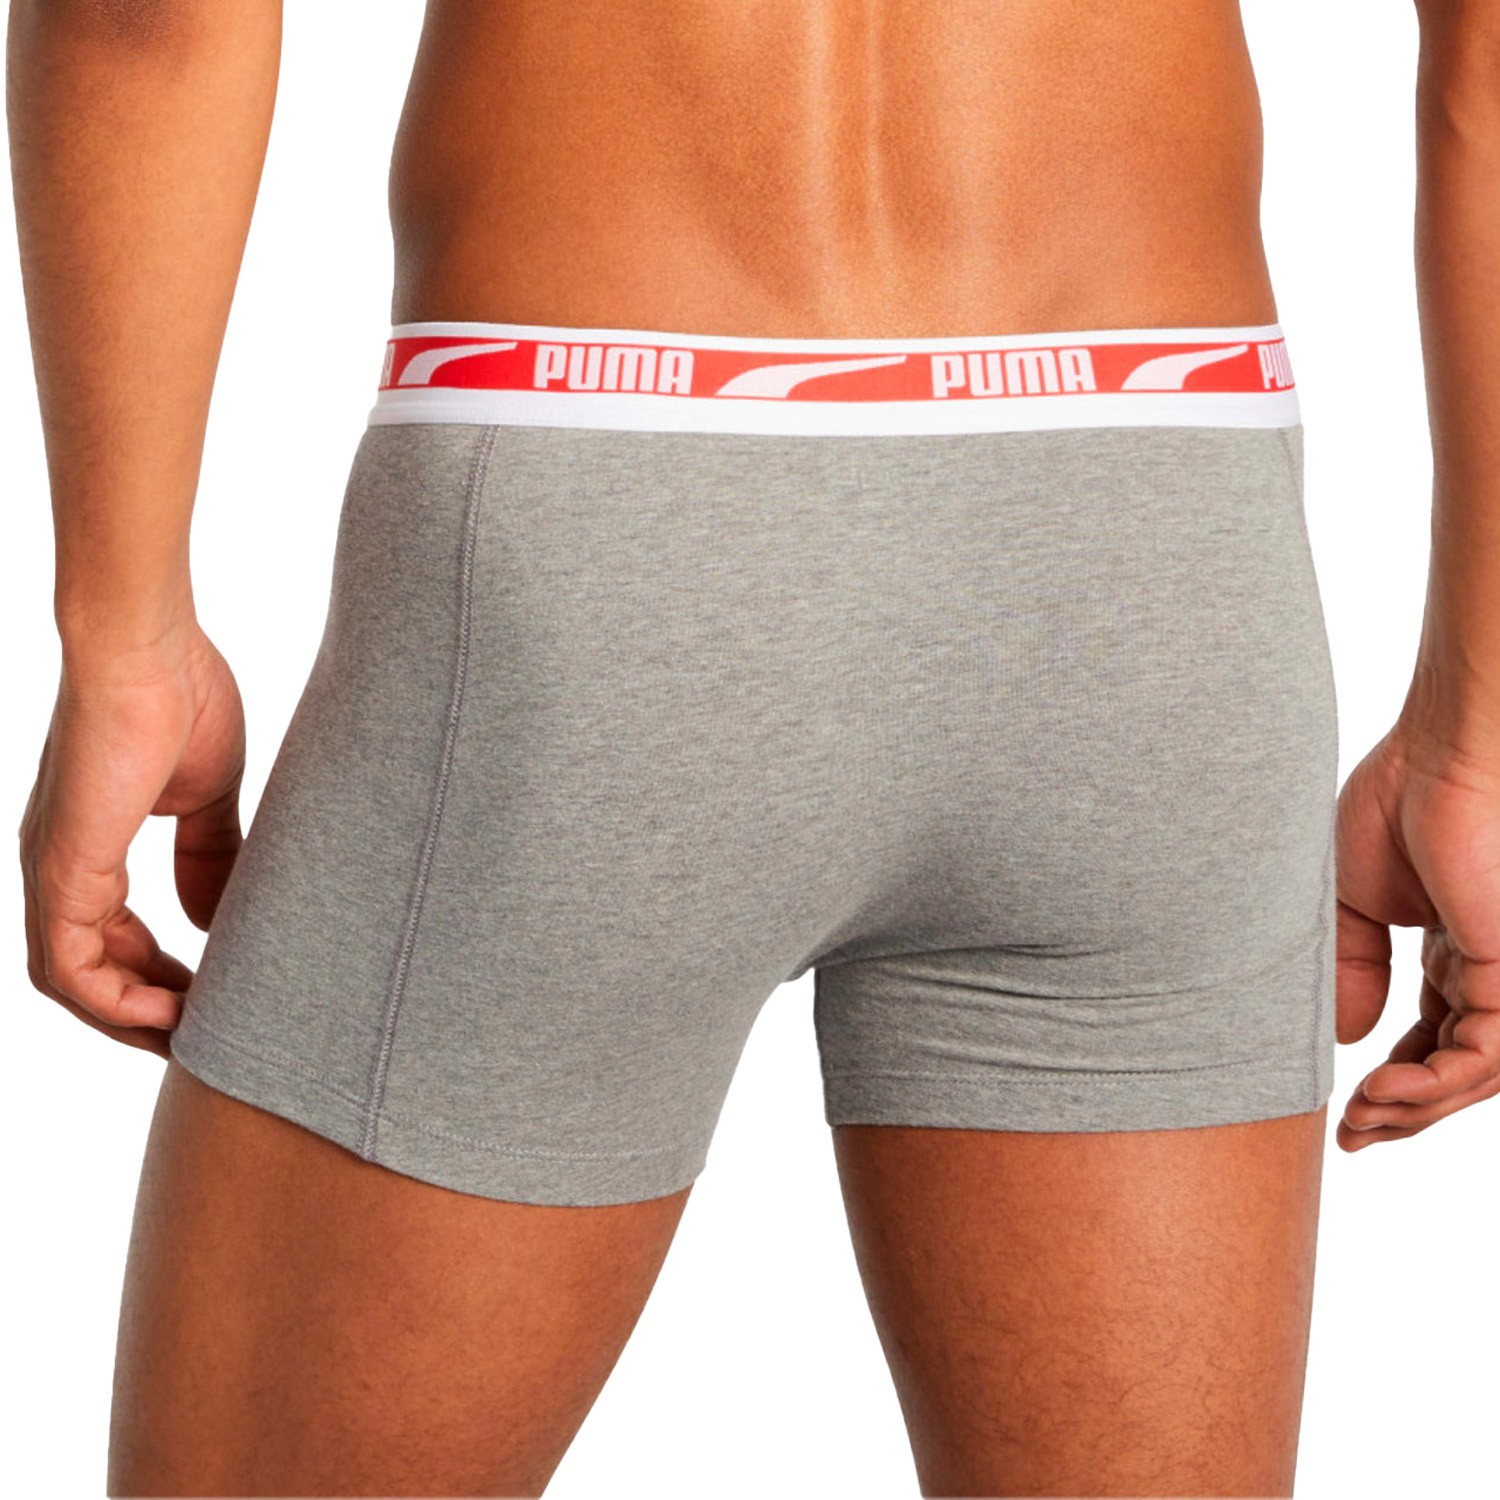 Set 2 Multi man grey of for - Packs and PUMA boxers red: logo